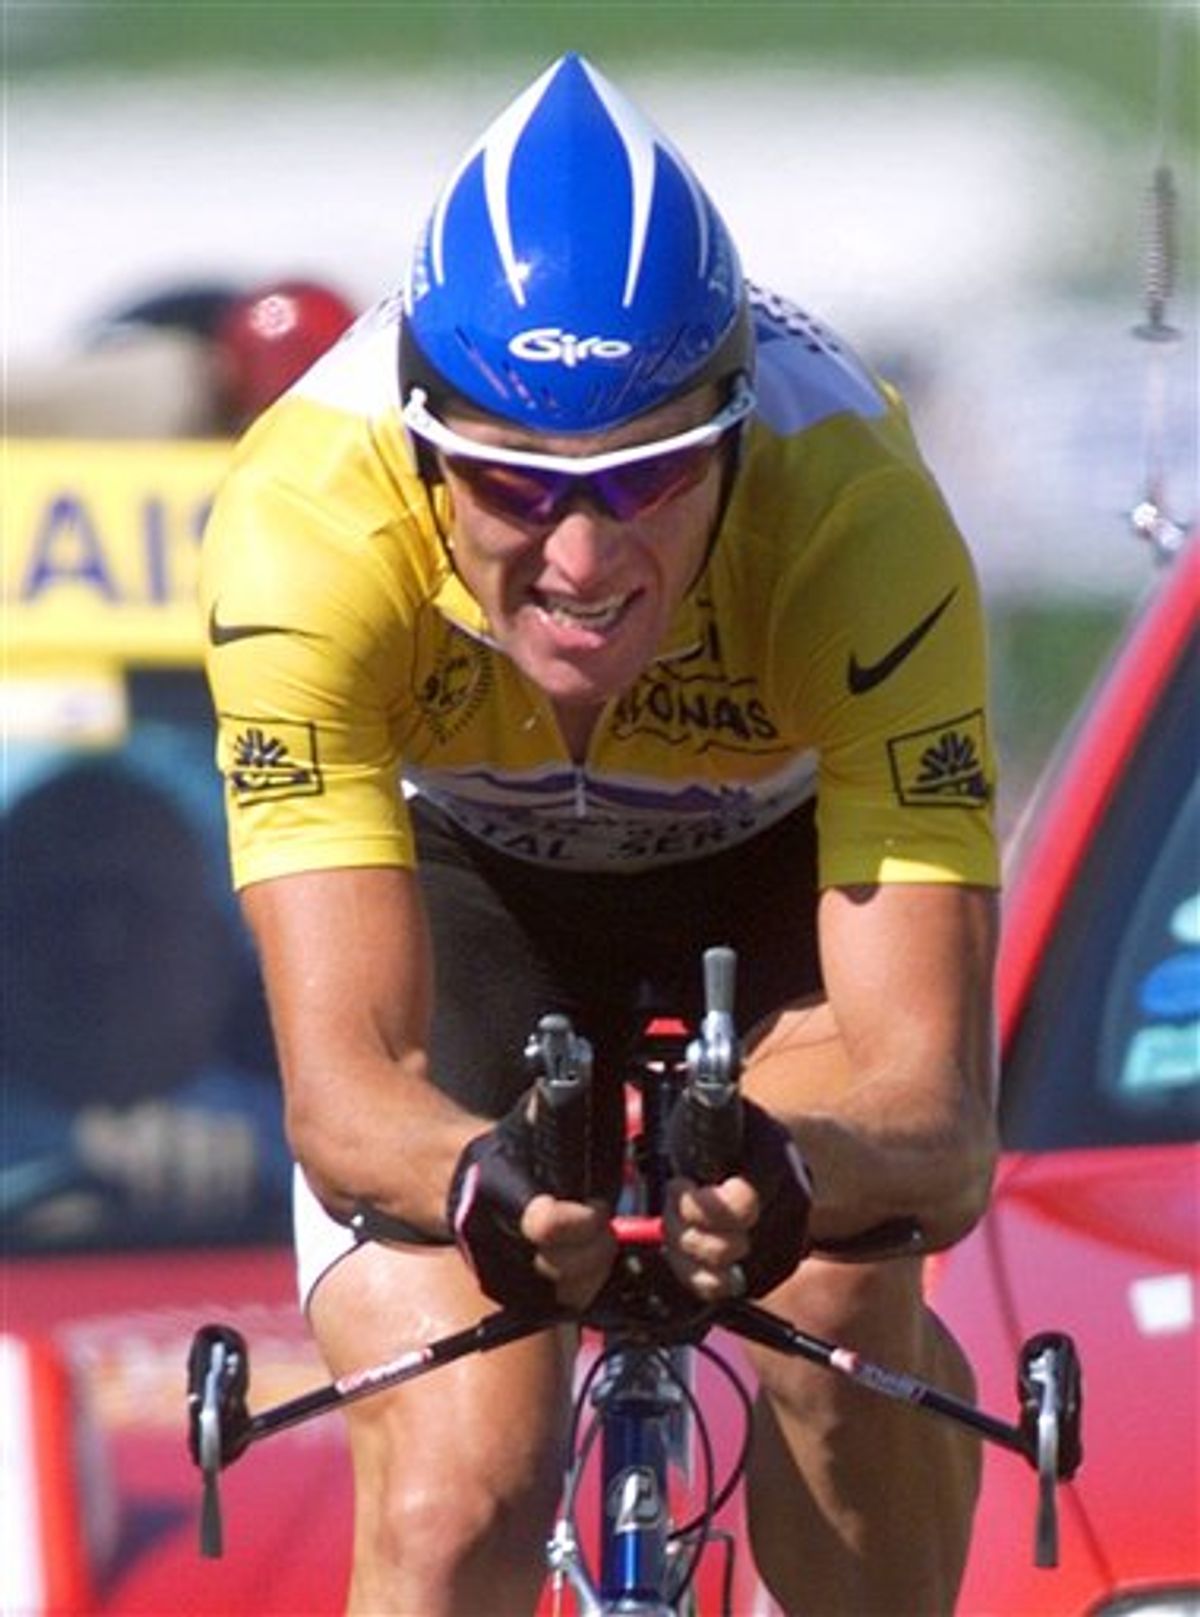 FILE - In this July 24, 1999 file photo, overall leader Lance Armstrong of the U.S. strains on his way to winning the 19th stage of the Tour de France cycling race, a 57-kilometer individual time trial around the Futuroscope theme park near Poitiers, western France. Tyler Hamilton, a former teammate of Armstrong, has told CBS News that he used performance-enhancing drugs with the seven-time Tour de France winner to cheat in cycling races, including the tour. Armstrong has steadfastly denied doping and has never failed a drug test. (AP Photo/Laurent Rebours, File)   (AP)